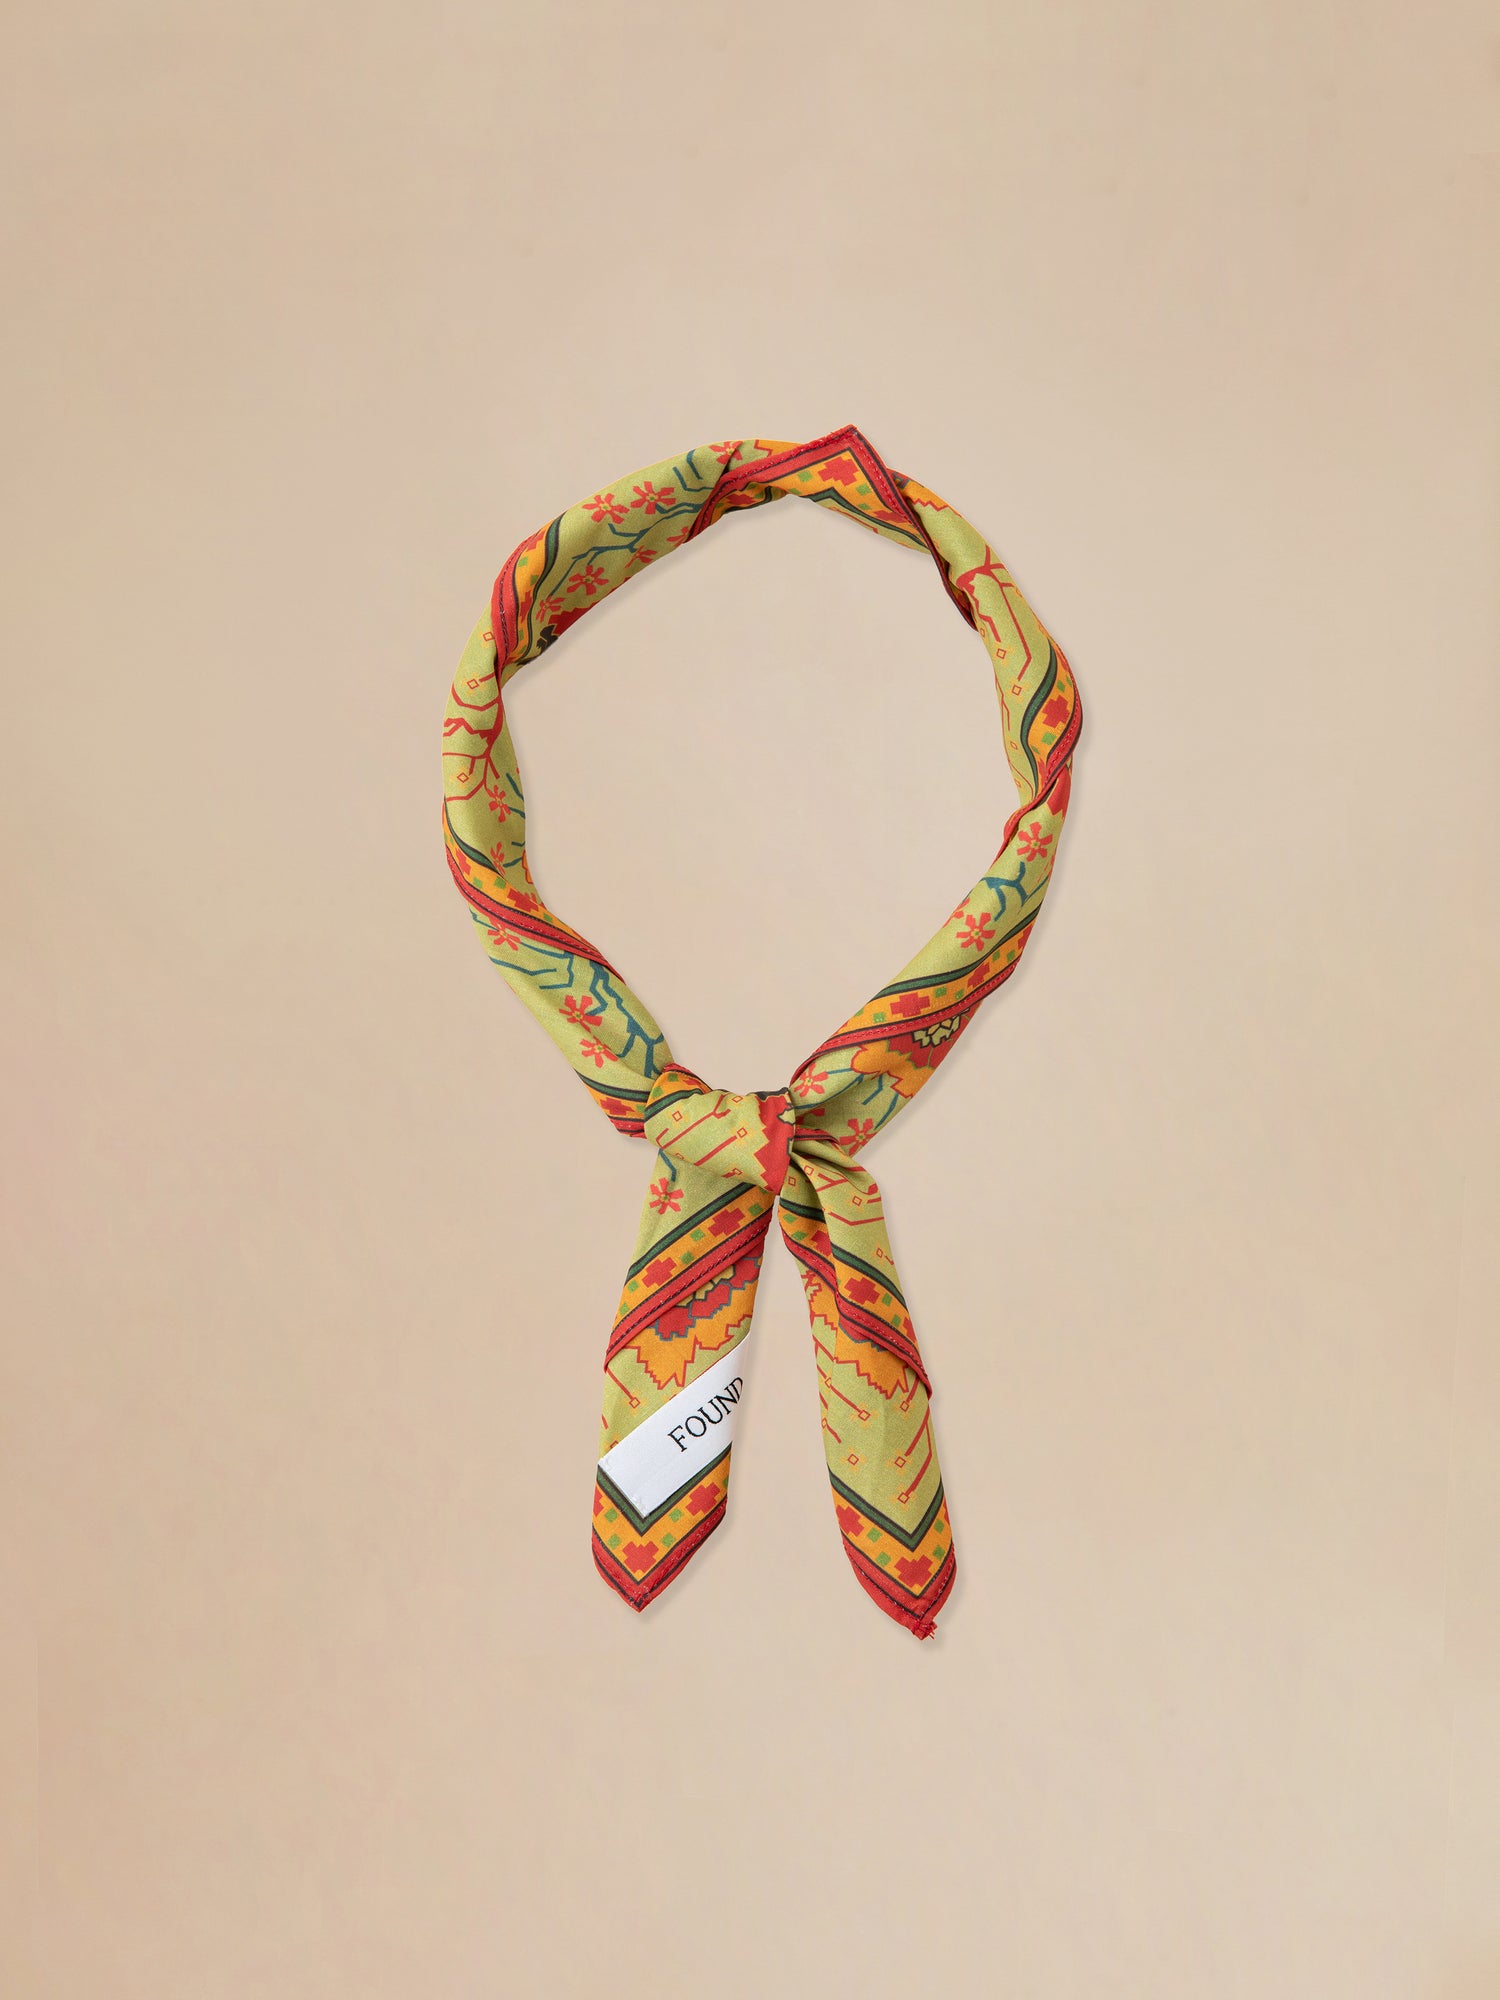 A yellow and red Botanical Mosaic Bandana with a white tag made by Found.